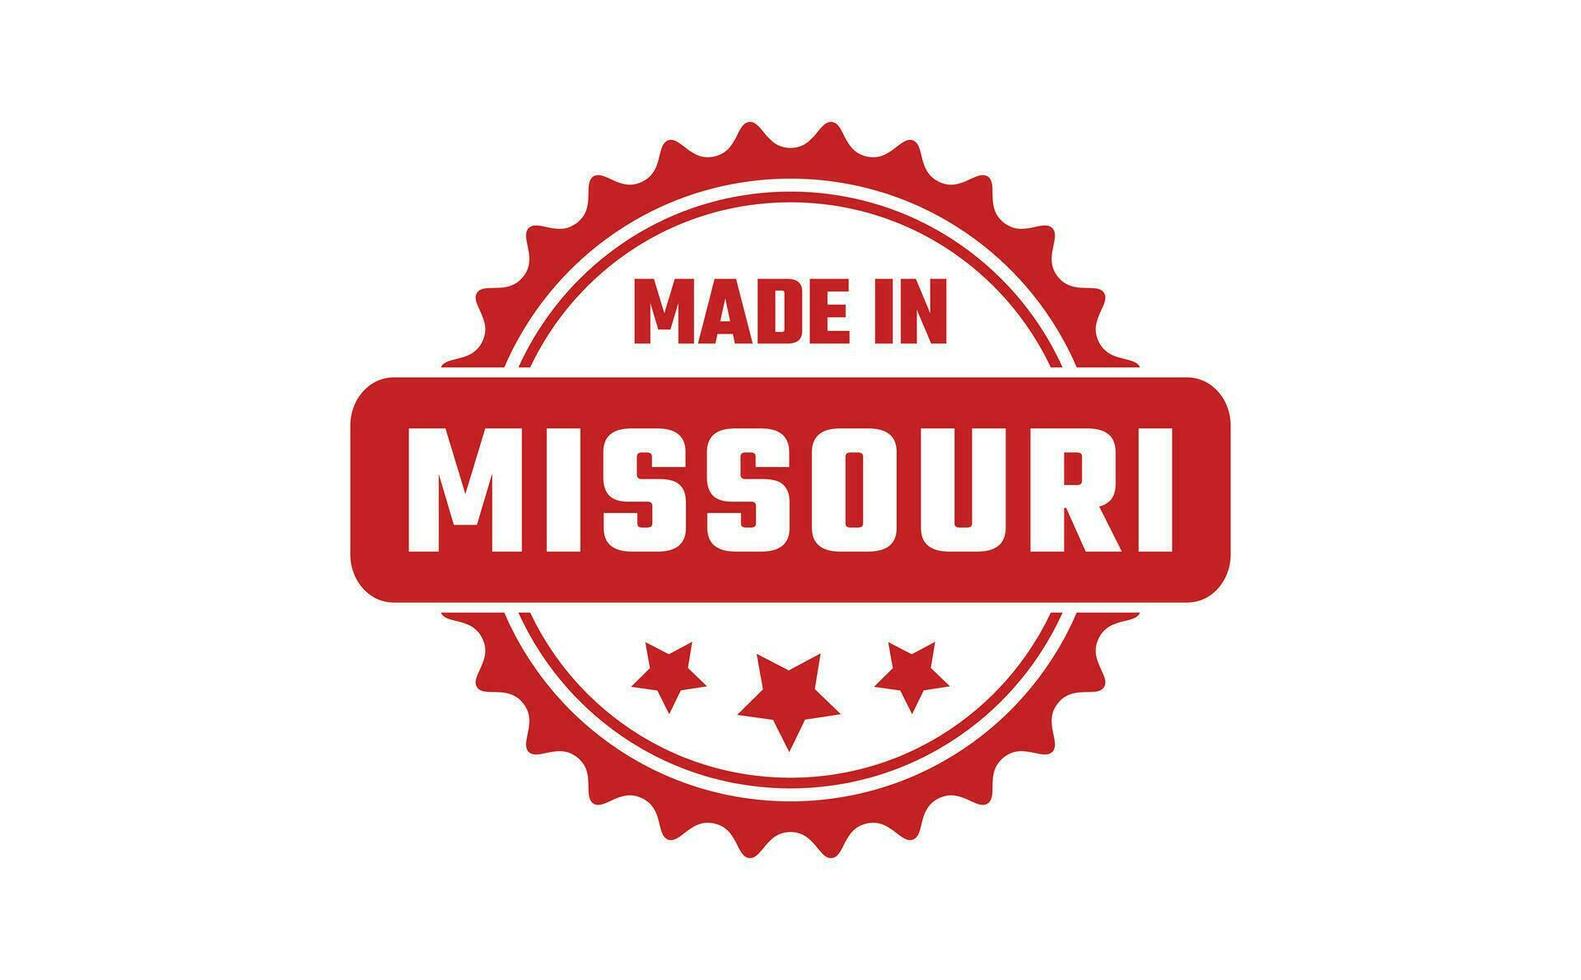 Made In Missouri Rubber Stamp vector